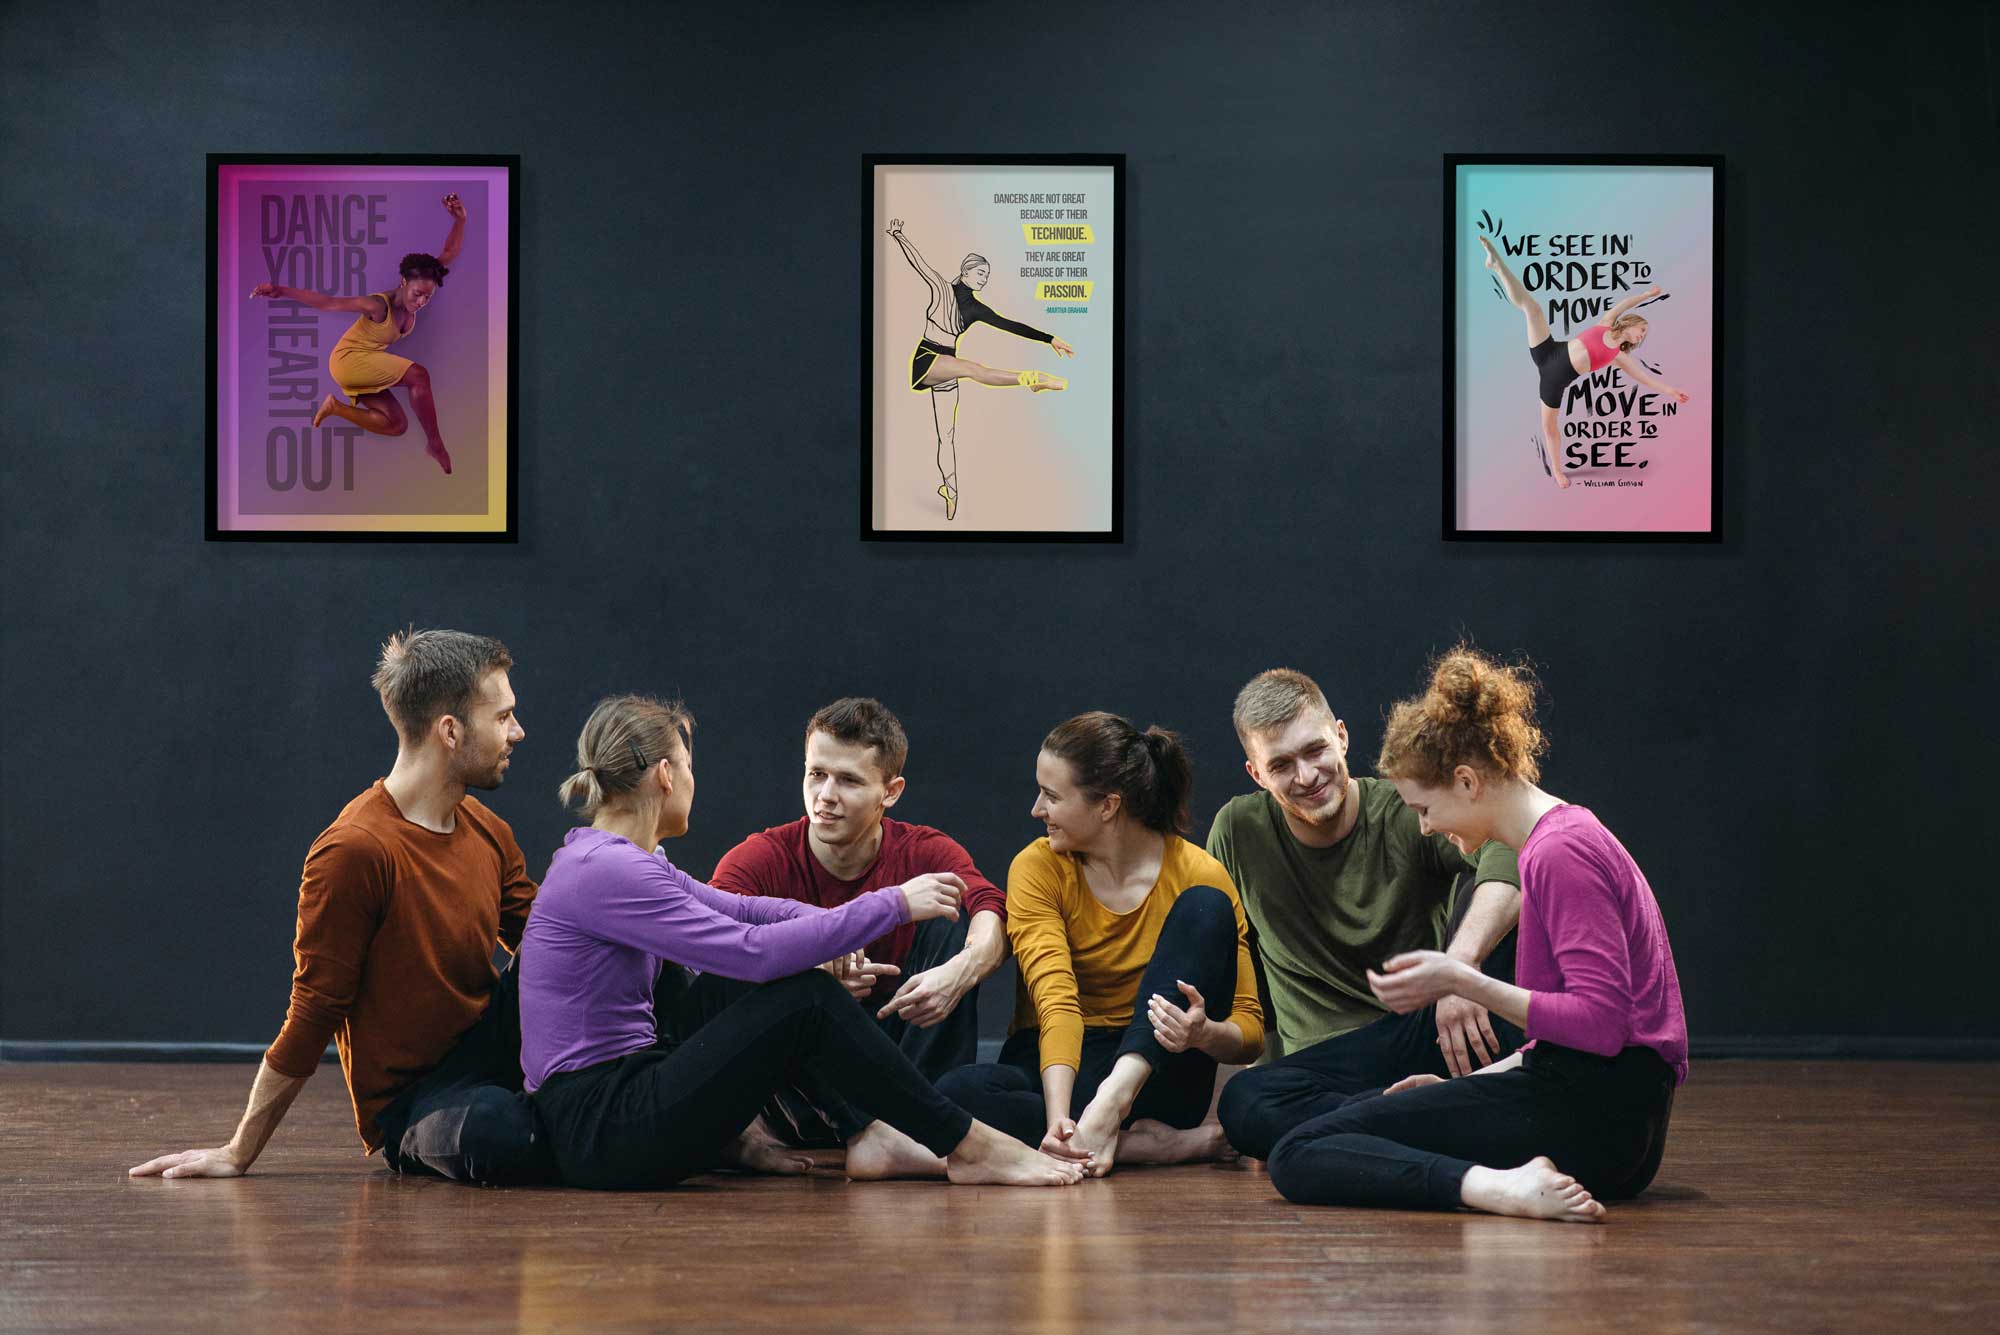 Illustrated and composited dance poster art in dance studio showing personal branding in art.